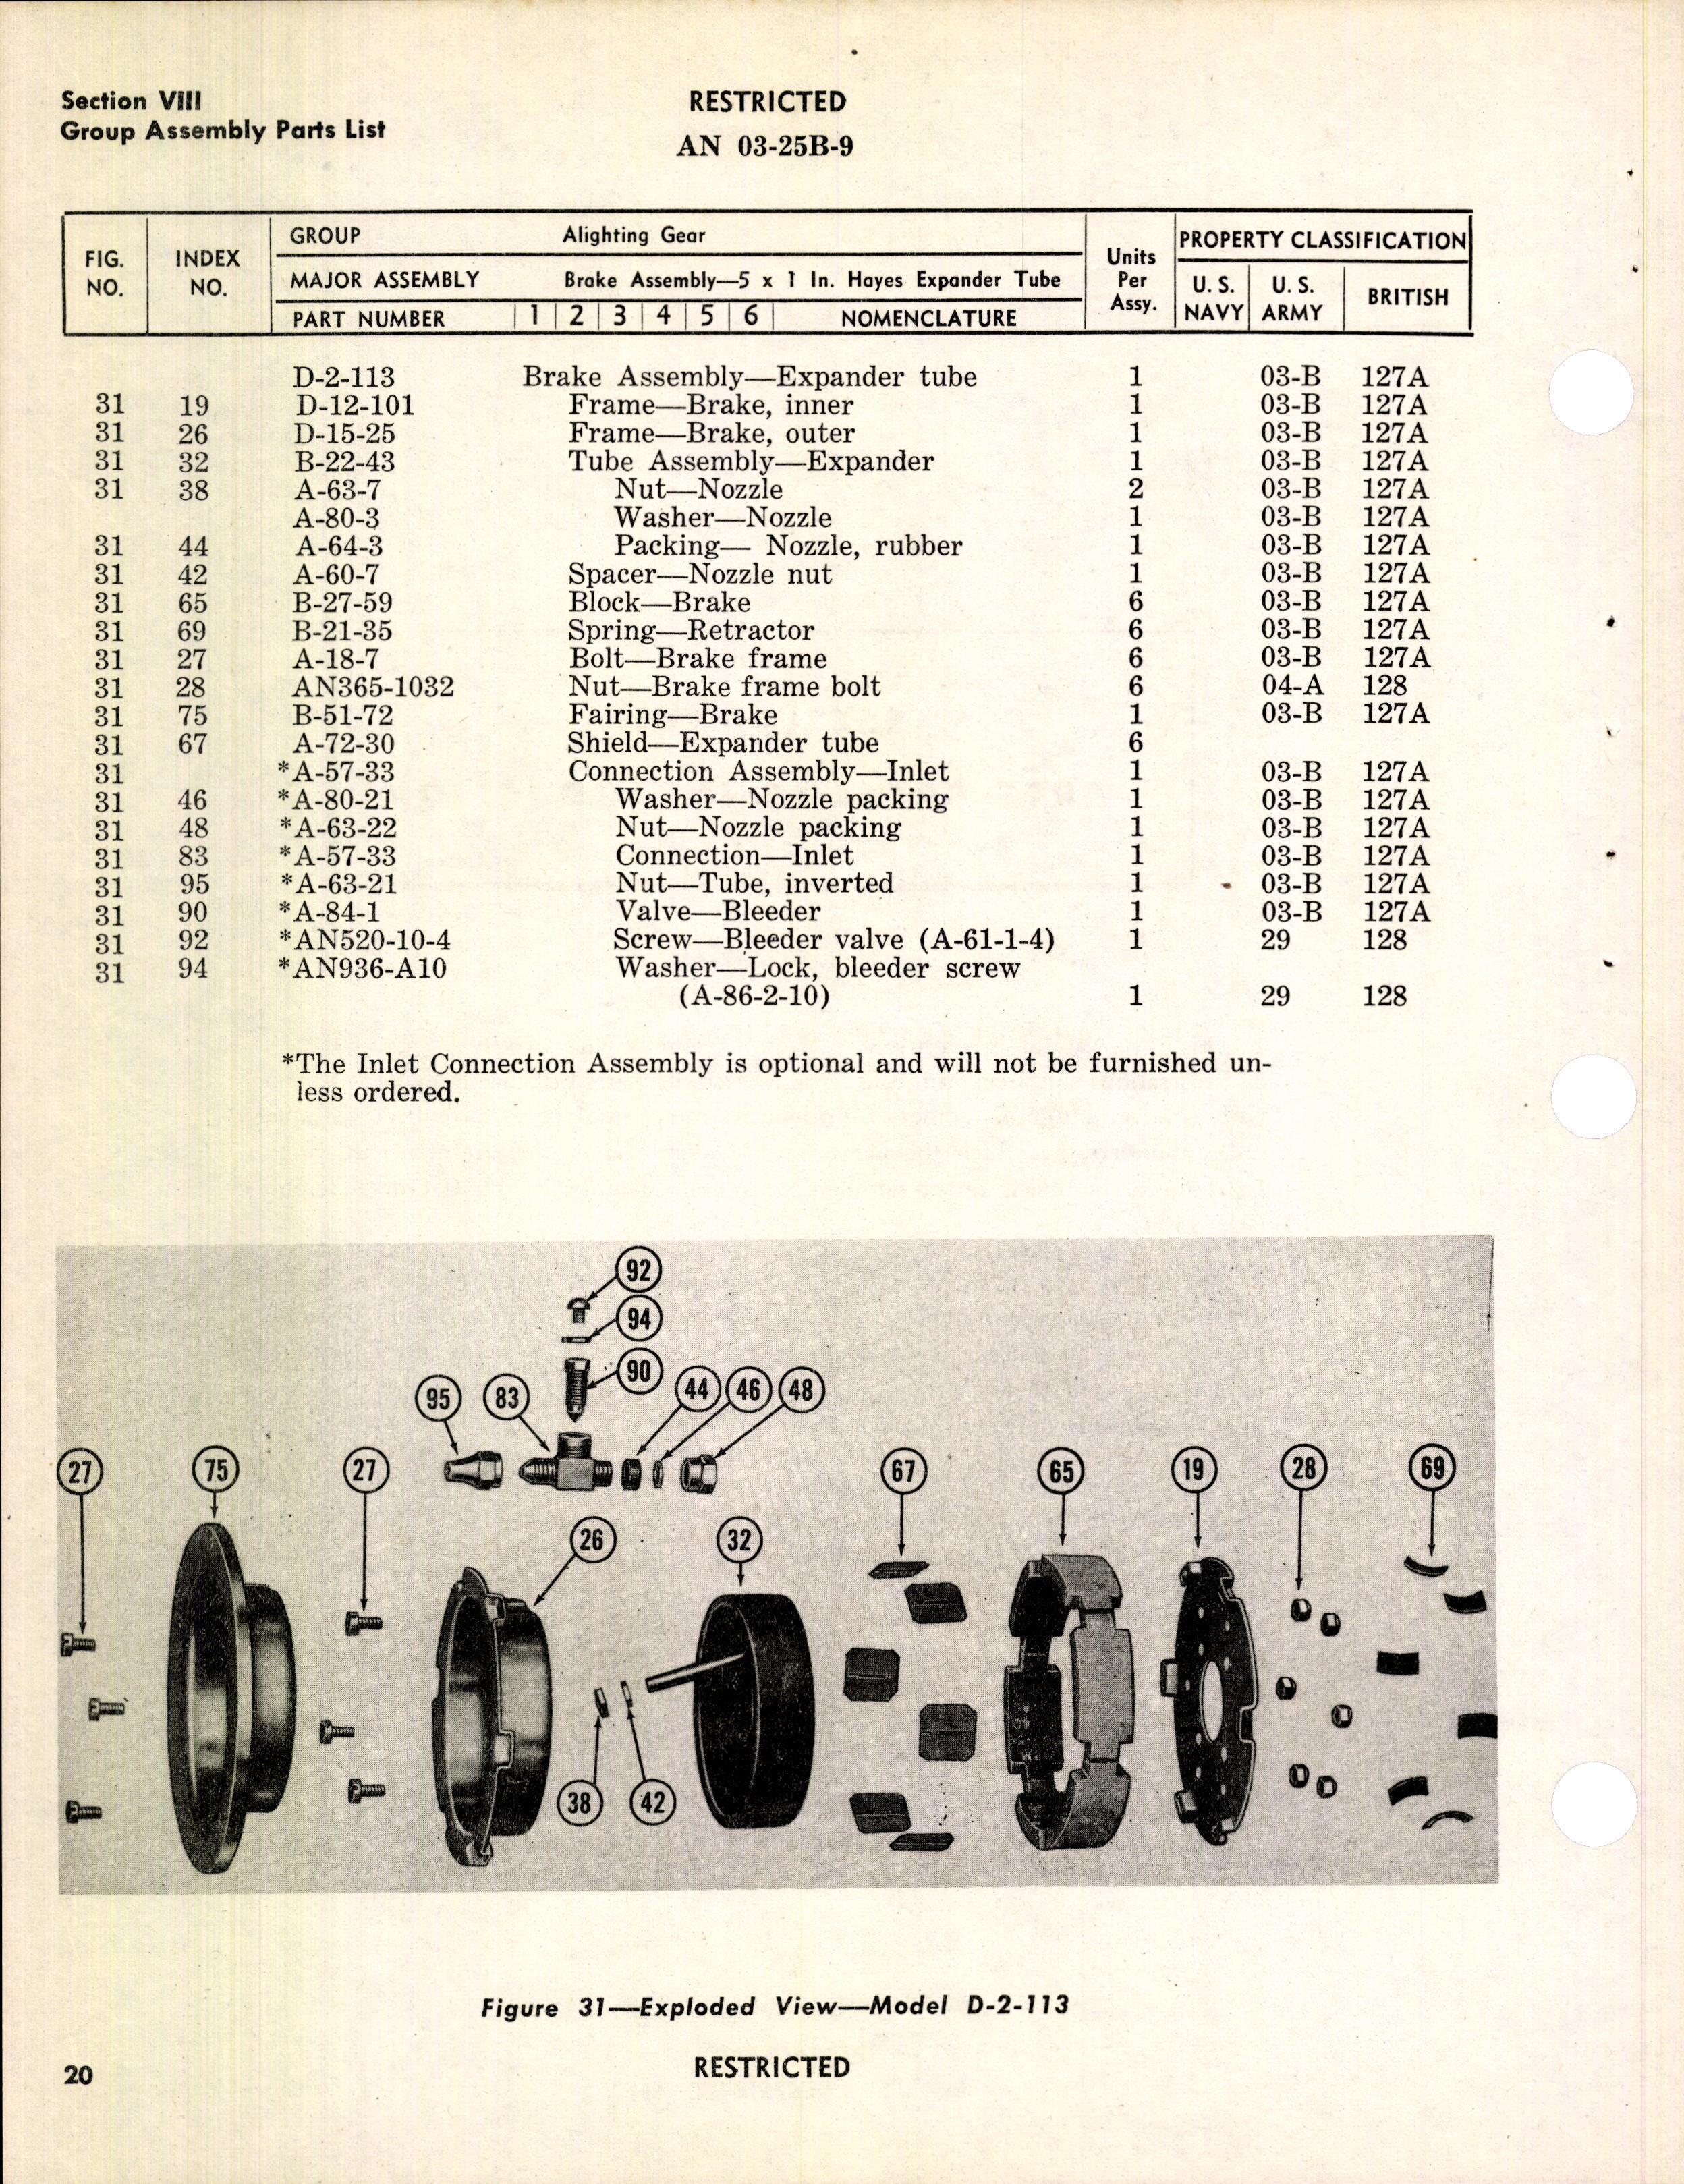 Sample page 38 from AirCorps Library document: Operation, Service & Overhaul Instructions with Parts Catalog for Expander Tube Brakes